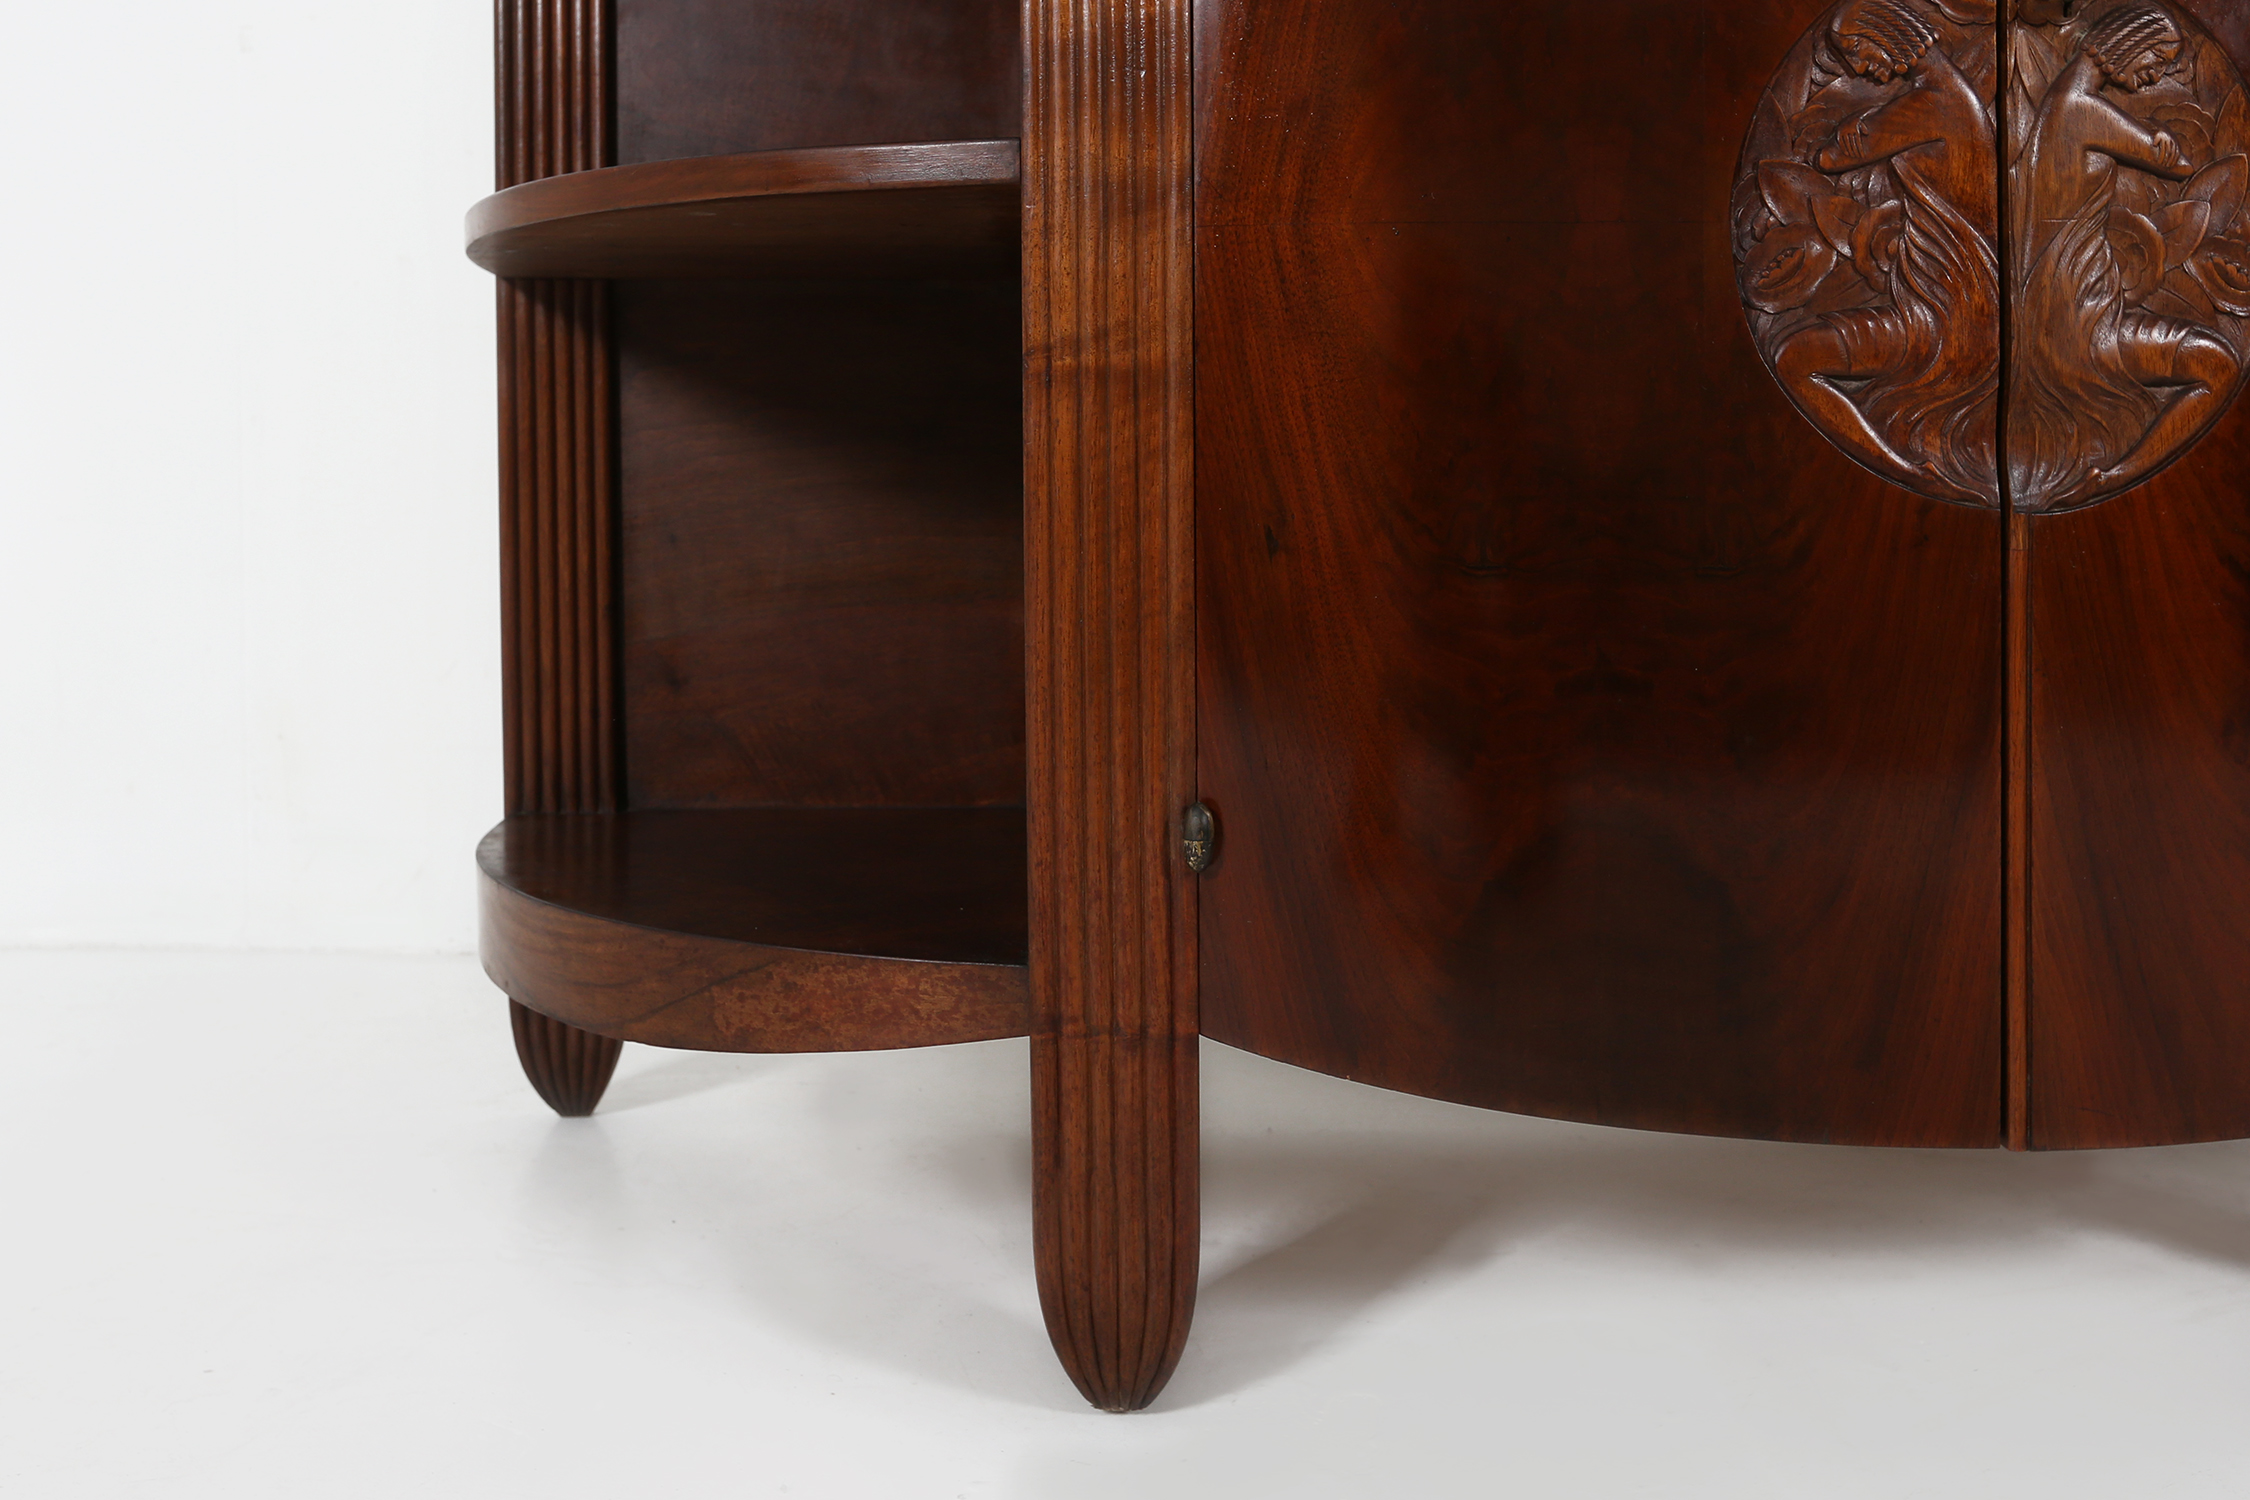 Cabinet attributed to Léon Jallotthumbnail